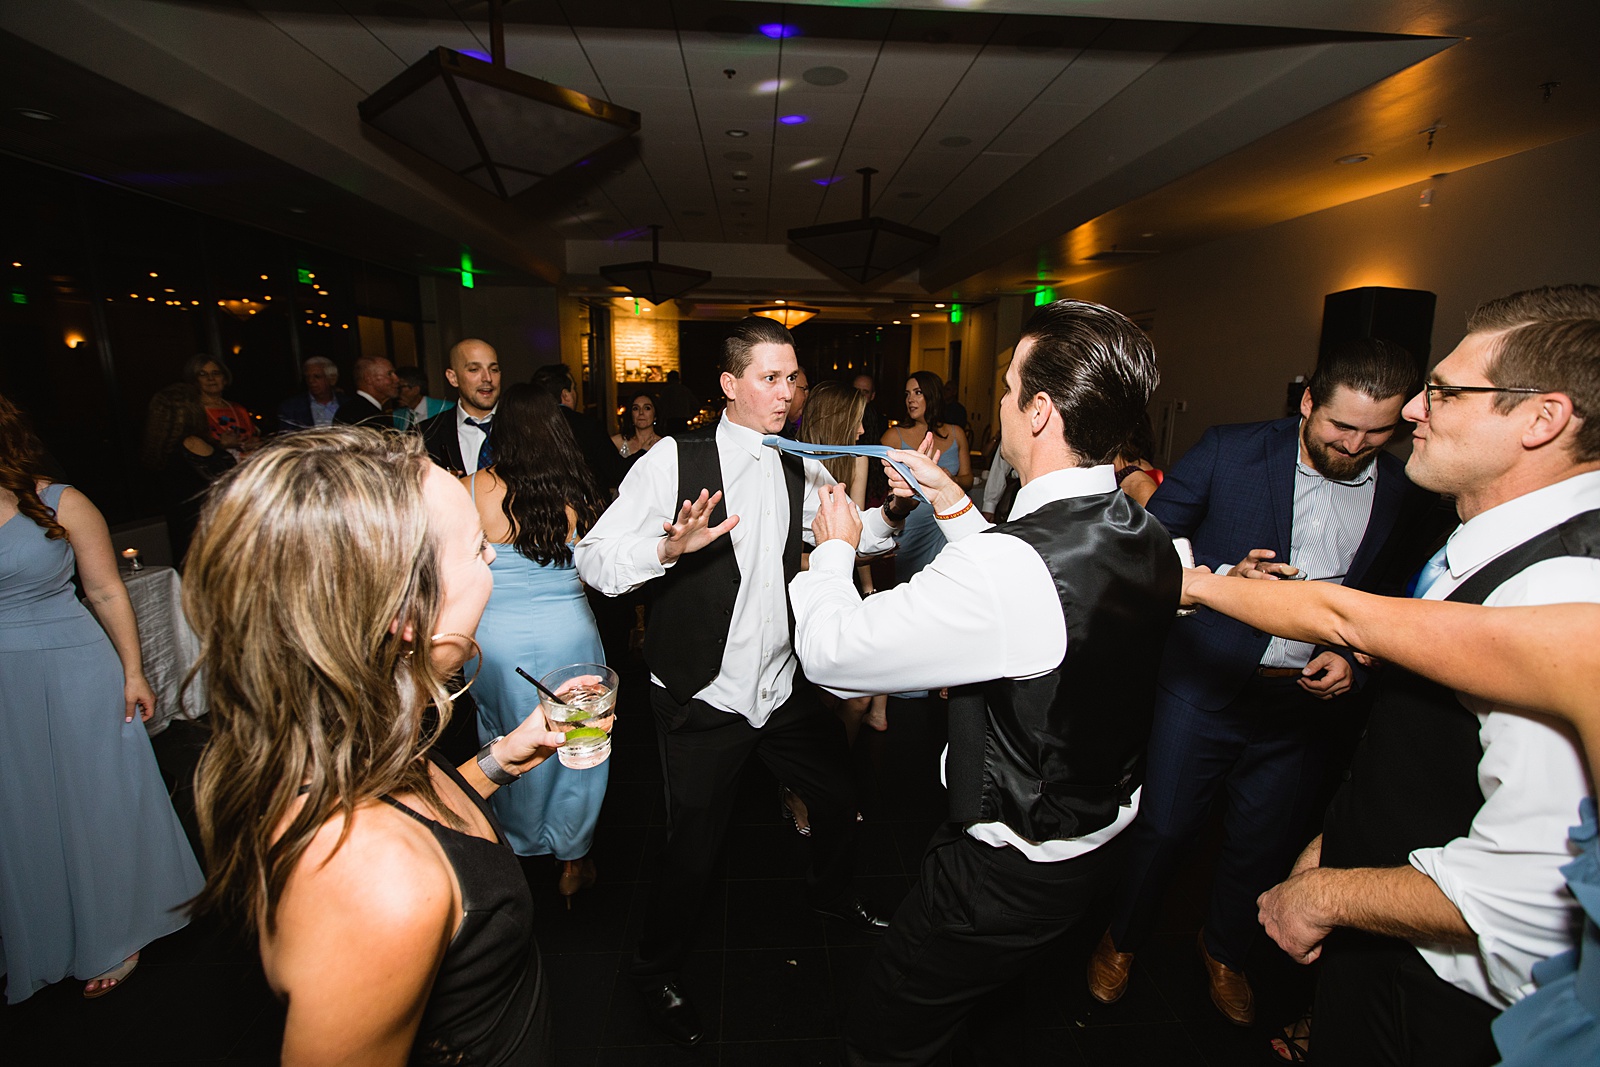 Guests dancing together at Troon North wedding reception by Scottsdale wedding photographer PMA Photography